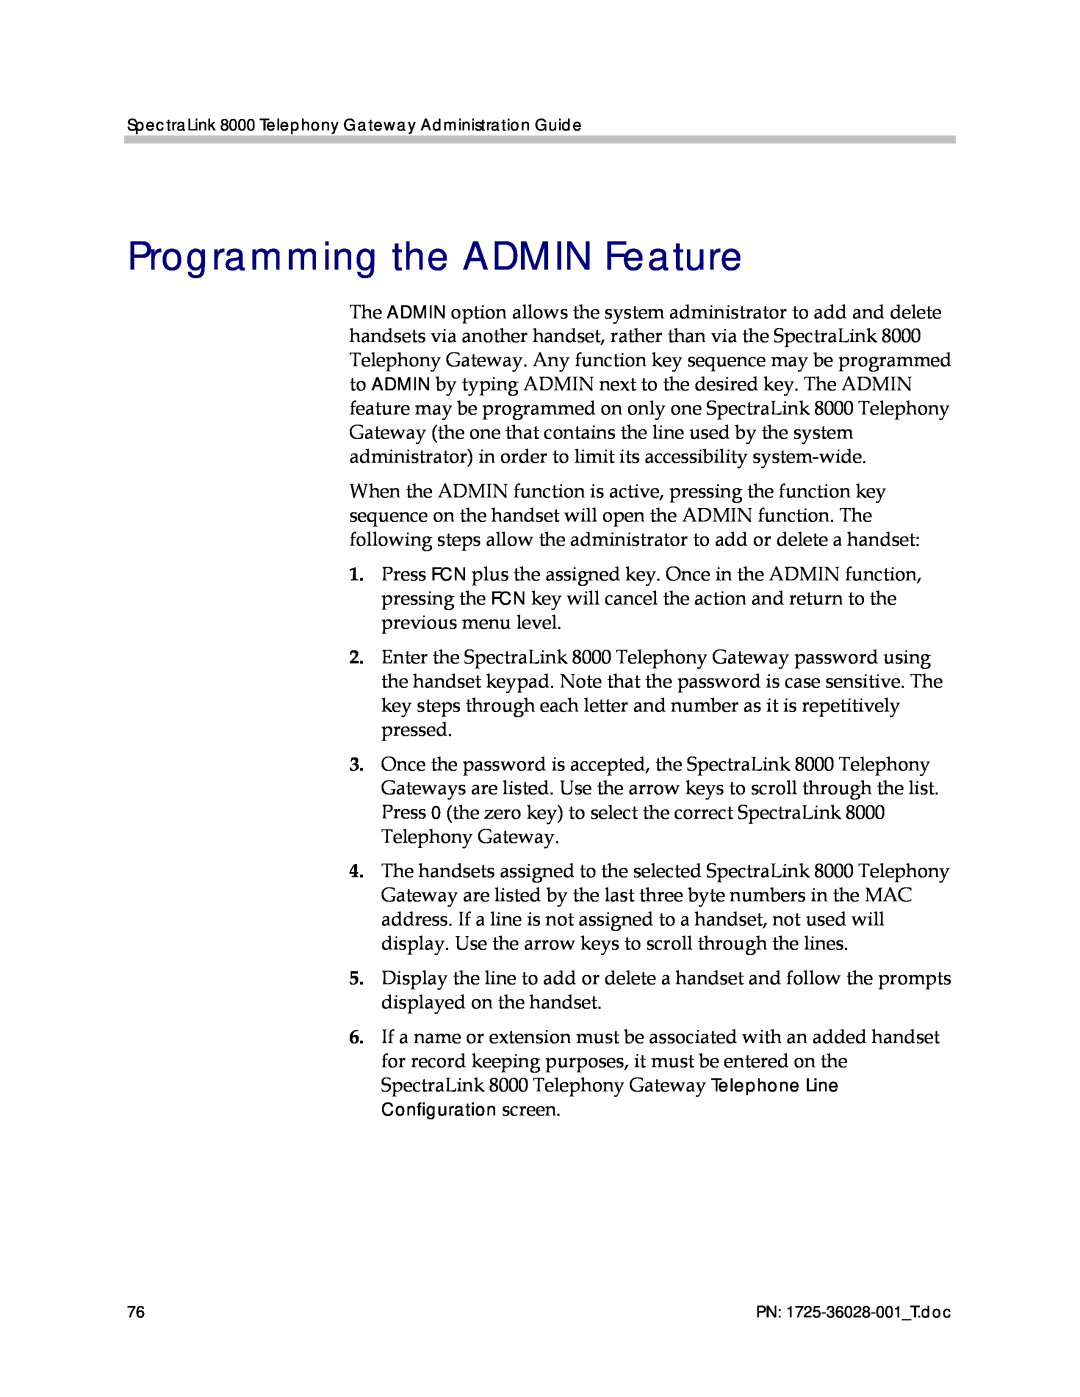 Polycom 1725-36028-001 manual Programming the ADMIN Feature 